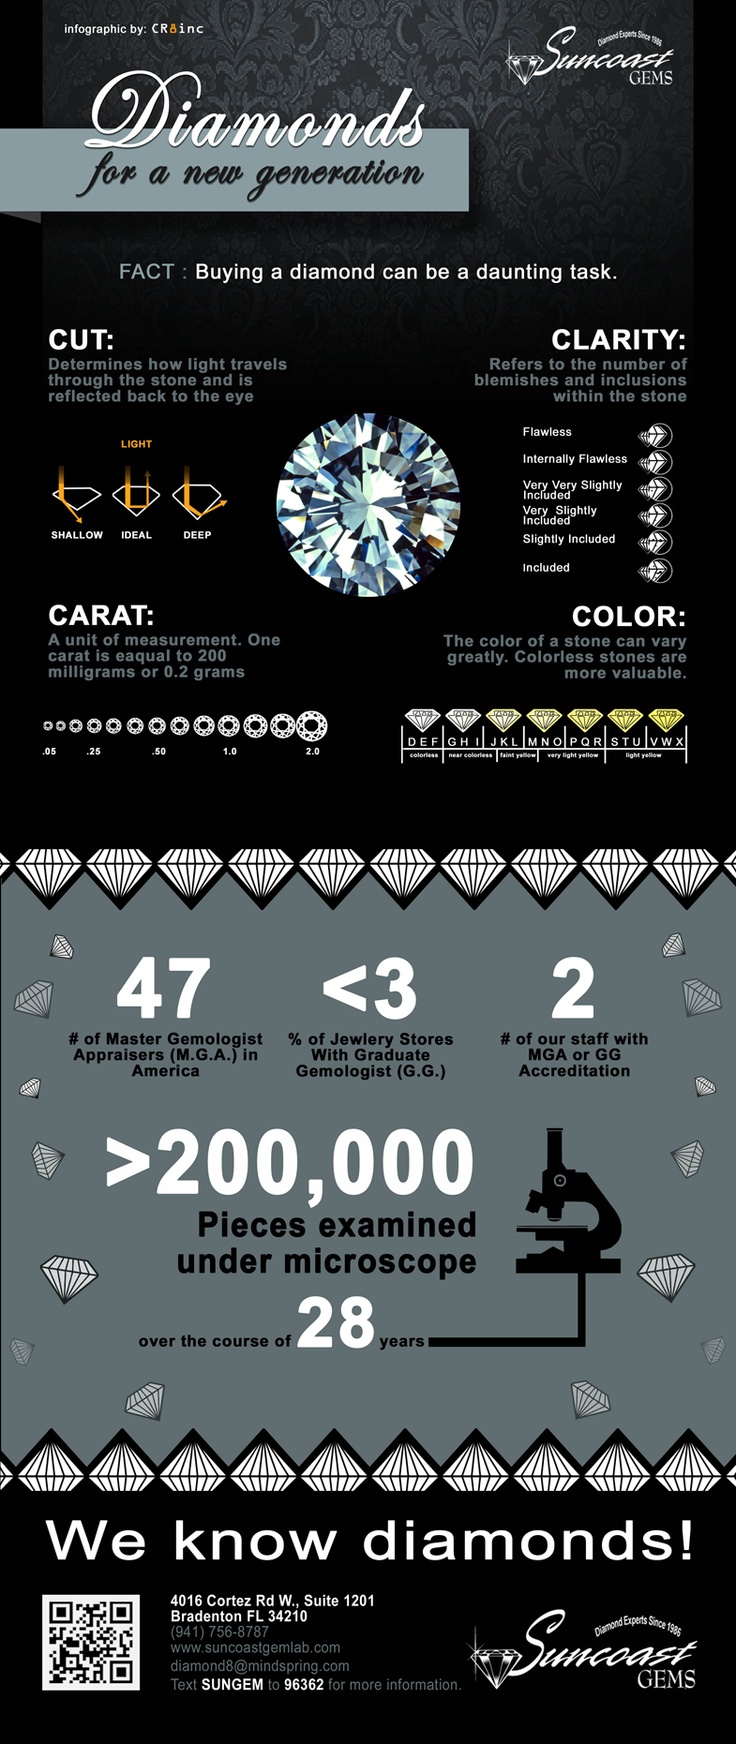 Diamonds for a new generation infographic